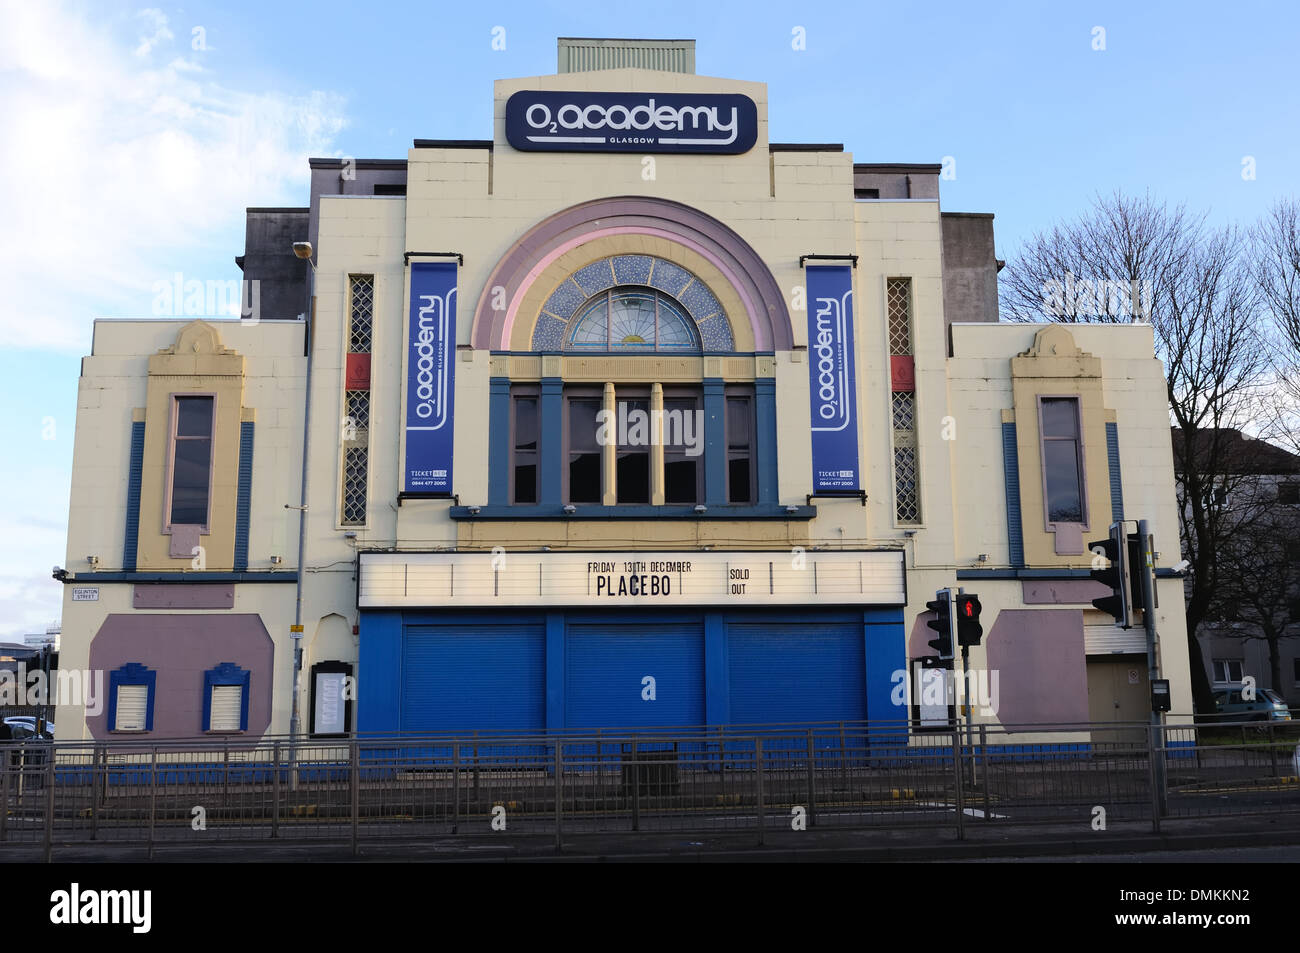 The O2 academy live music venue in the southside of Glasgow, Scotland, UK Stock Photo